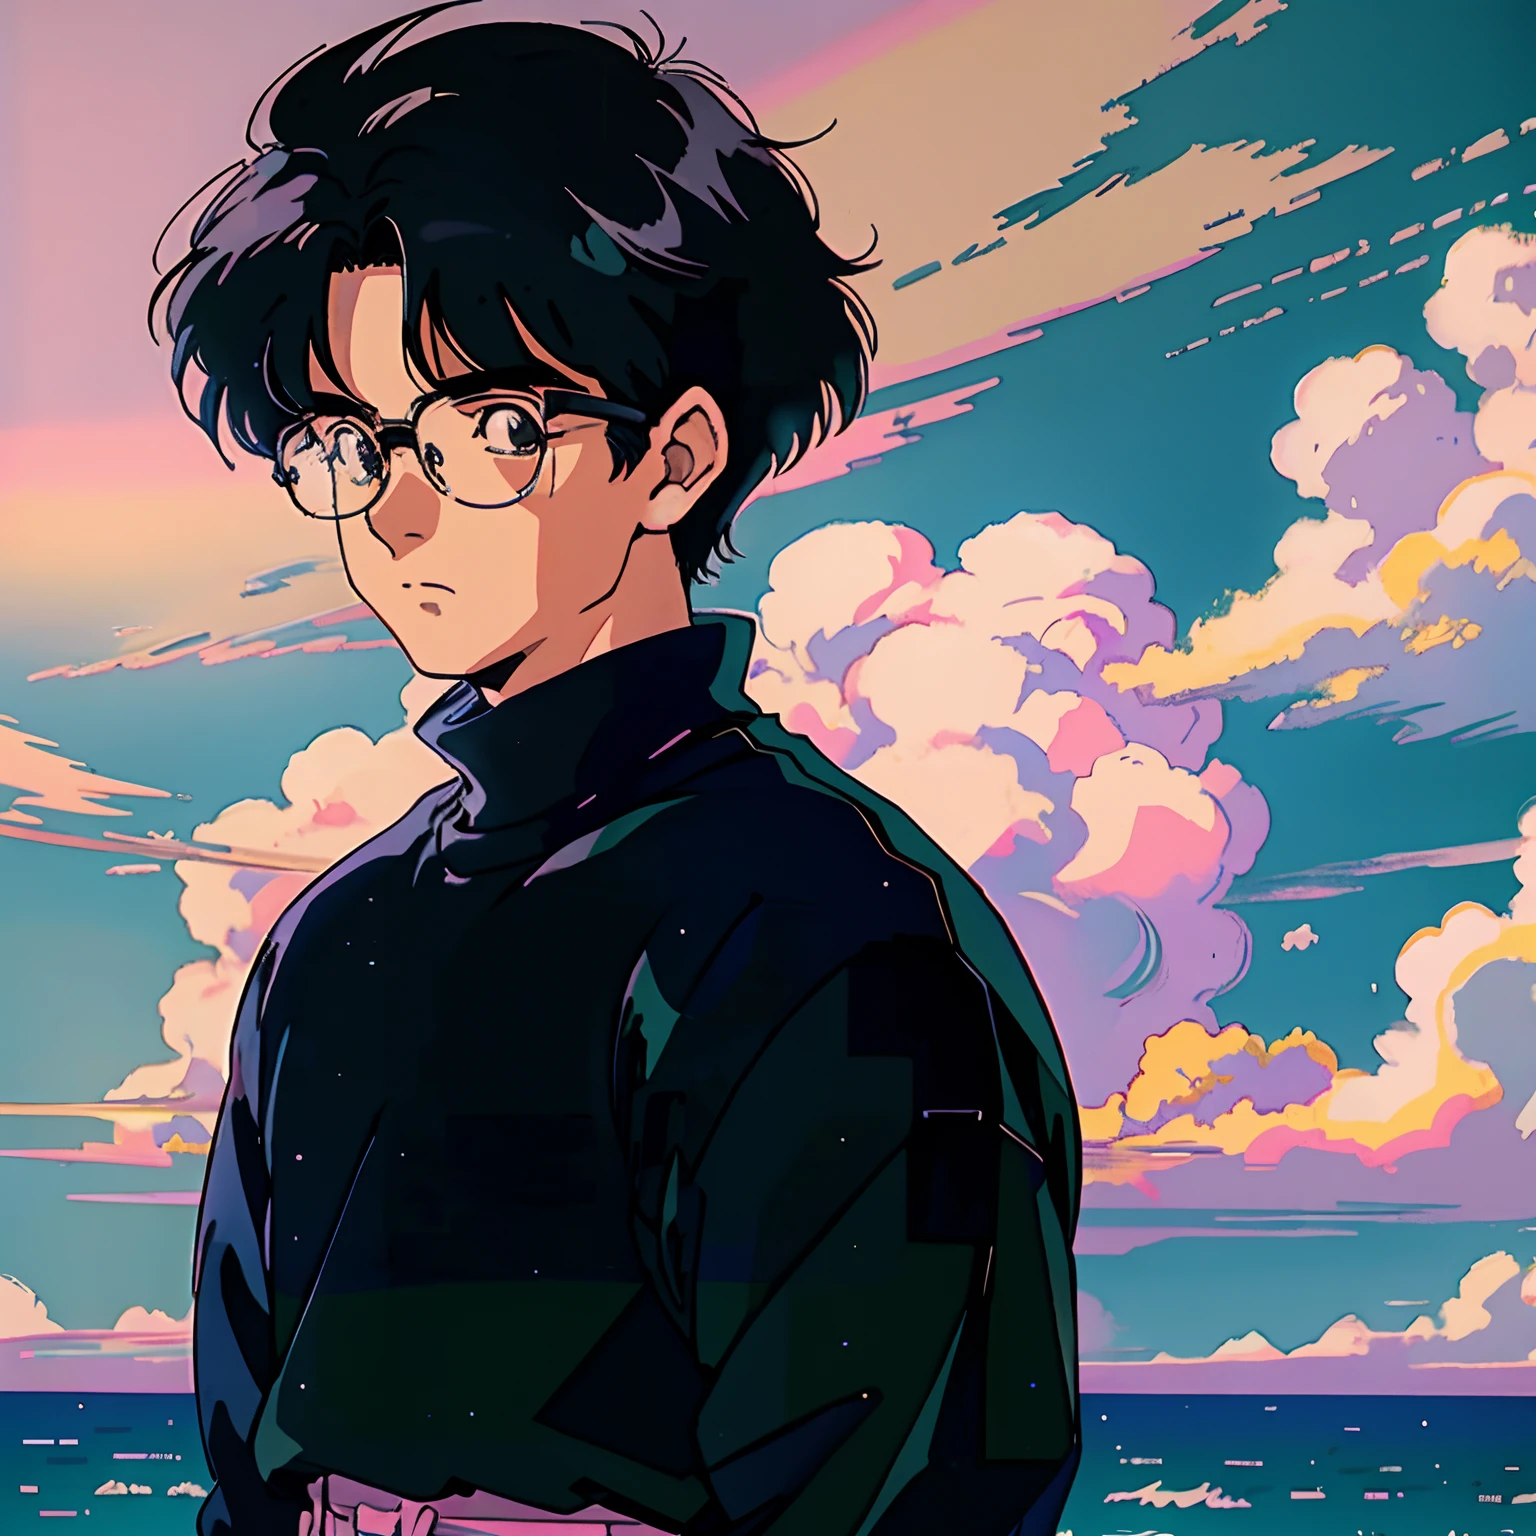 muted pastel colors，Soft picture，Retro Anime, 1990s anime, 1980s anime, Retro Anime，Retro Anime style，Masterpiece, Best quality, 1boy, solo, Black eyes, Long black hair，Bob cut，Medium hair, Large round frame glasses，Black sweater，Closed mouth，Simple background